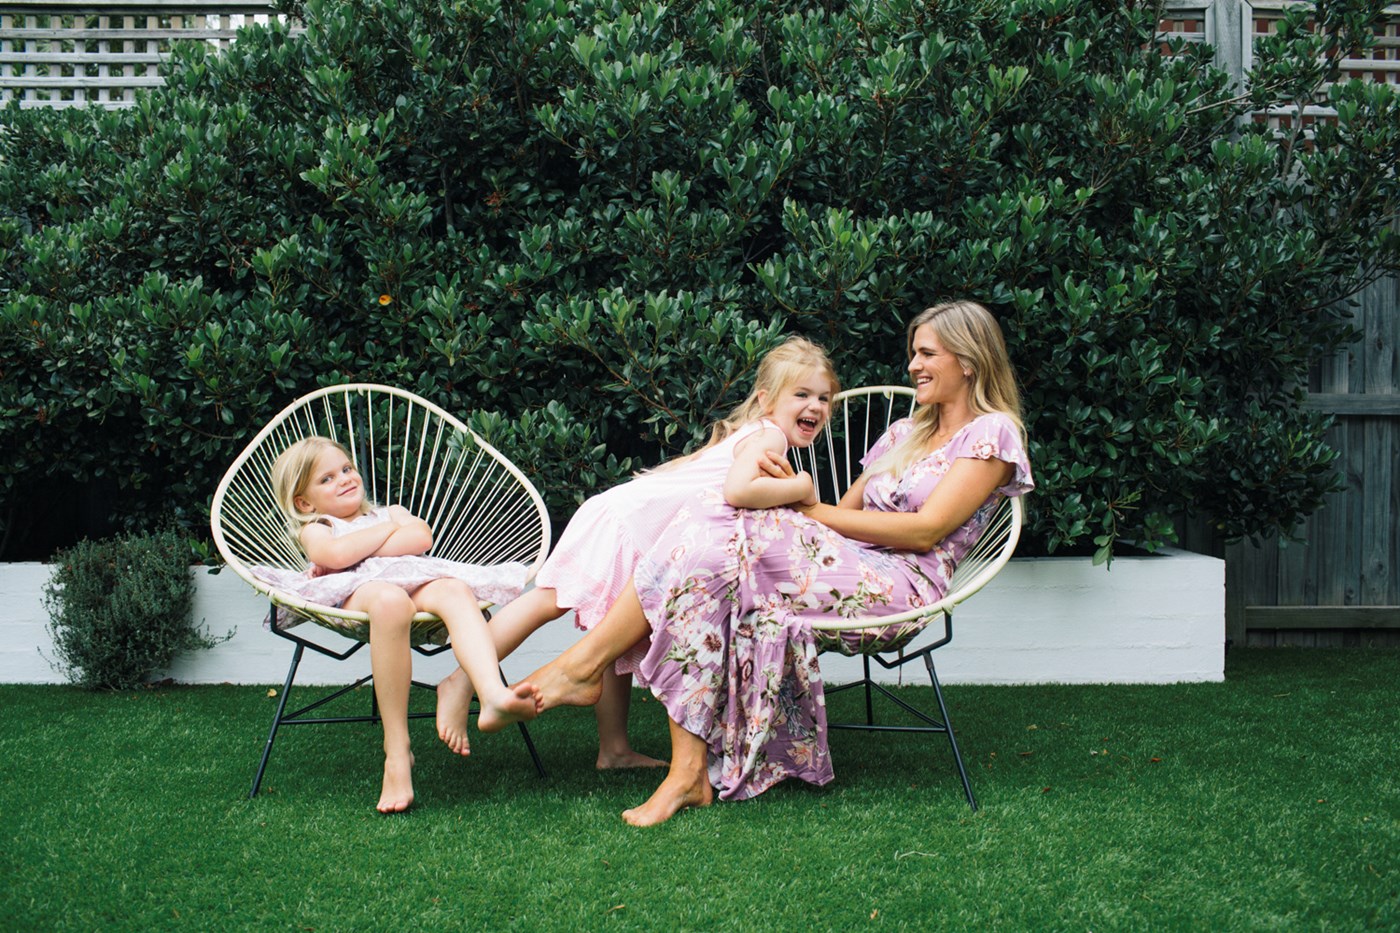 Bronwyn McCahon and her kids at their home